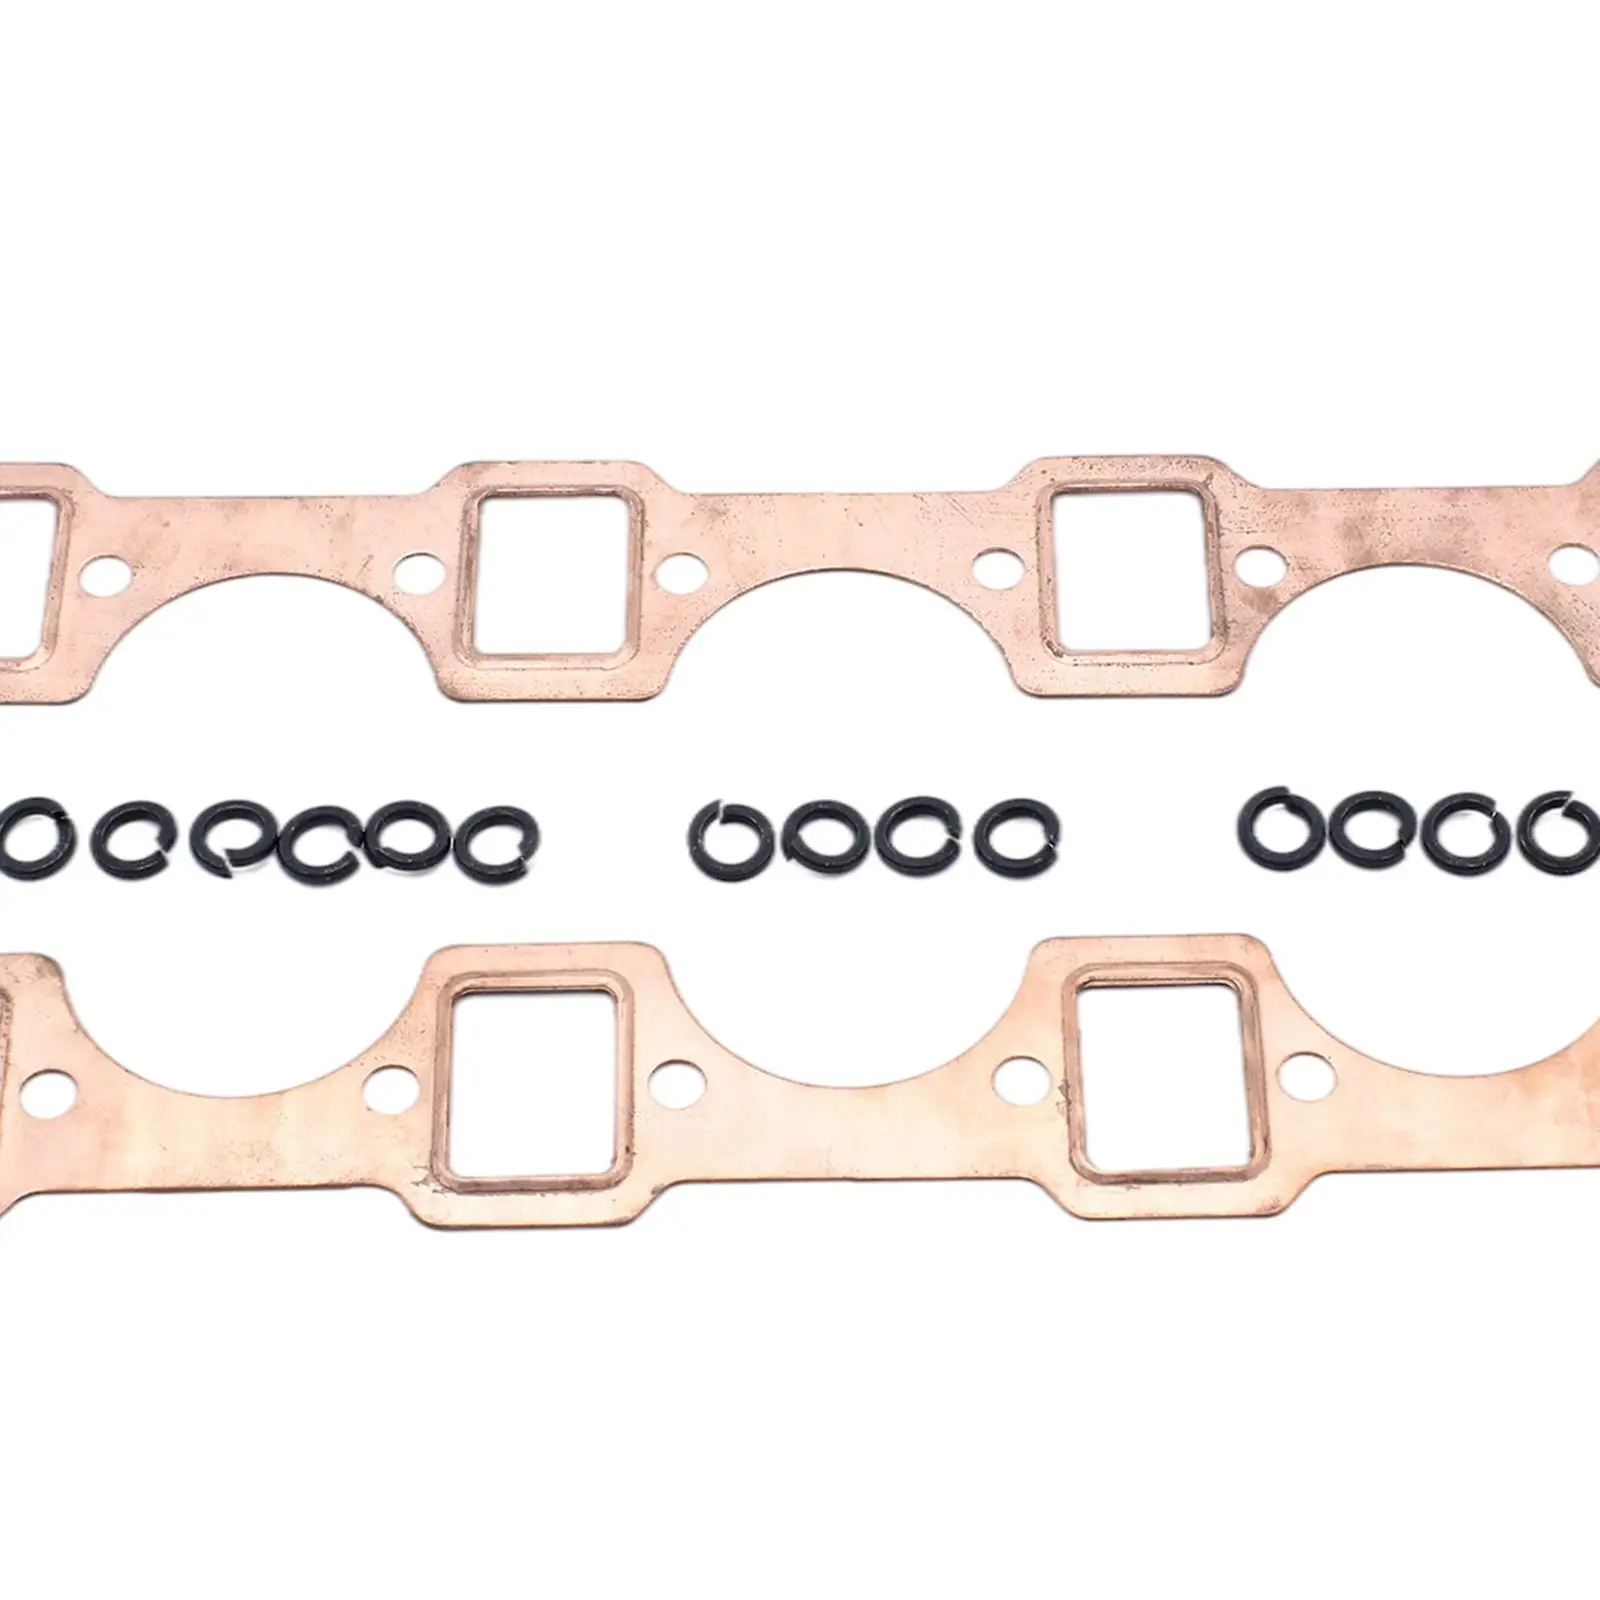 2 Pieces Exhaust Header Gaskets Plating Small Block Port Gasket Reusable Copper for Ford 289 4.8L 351W 5.8L 260 4.3L 62-86